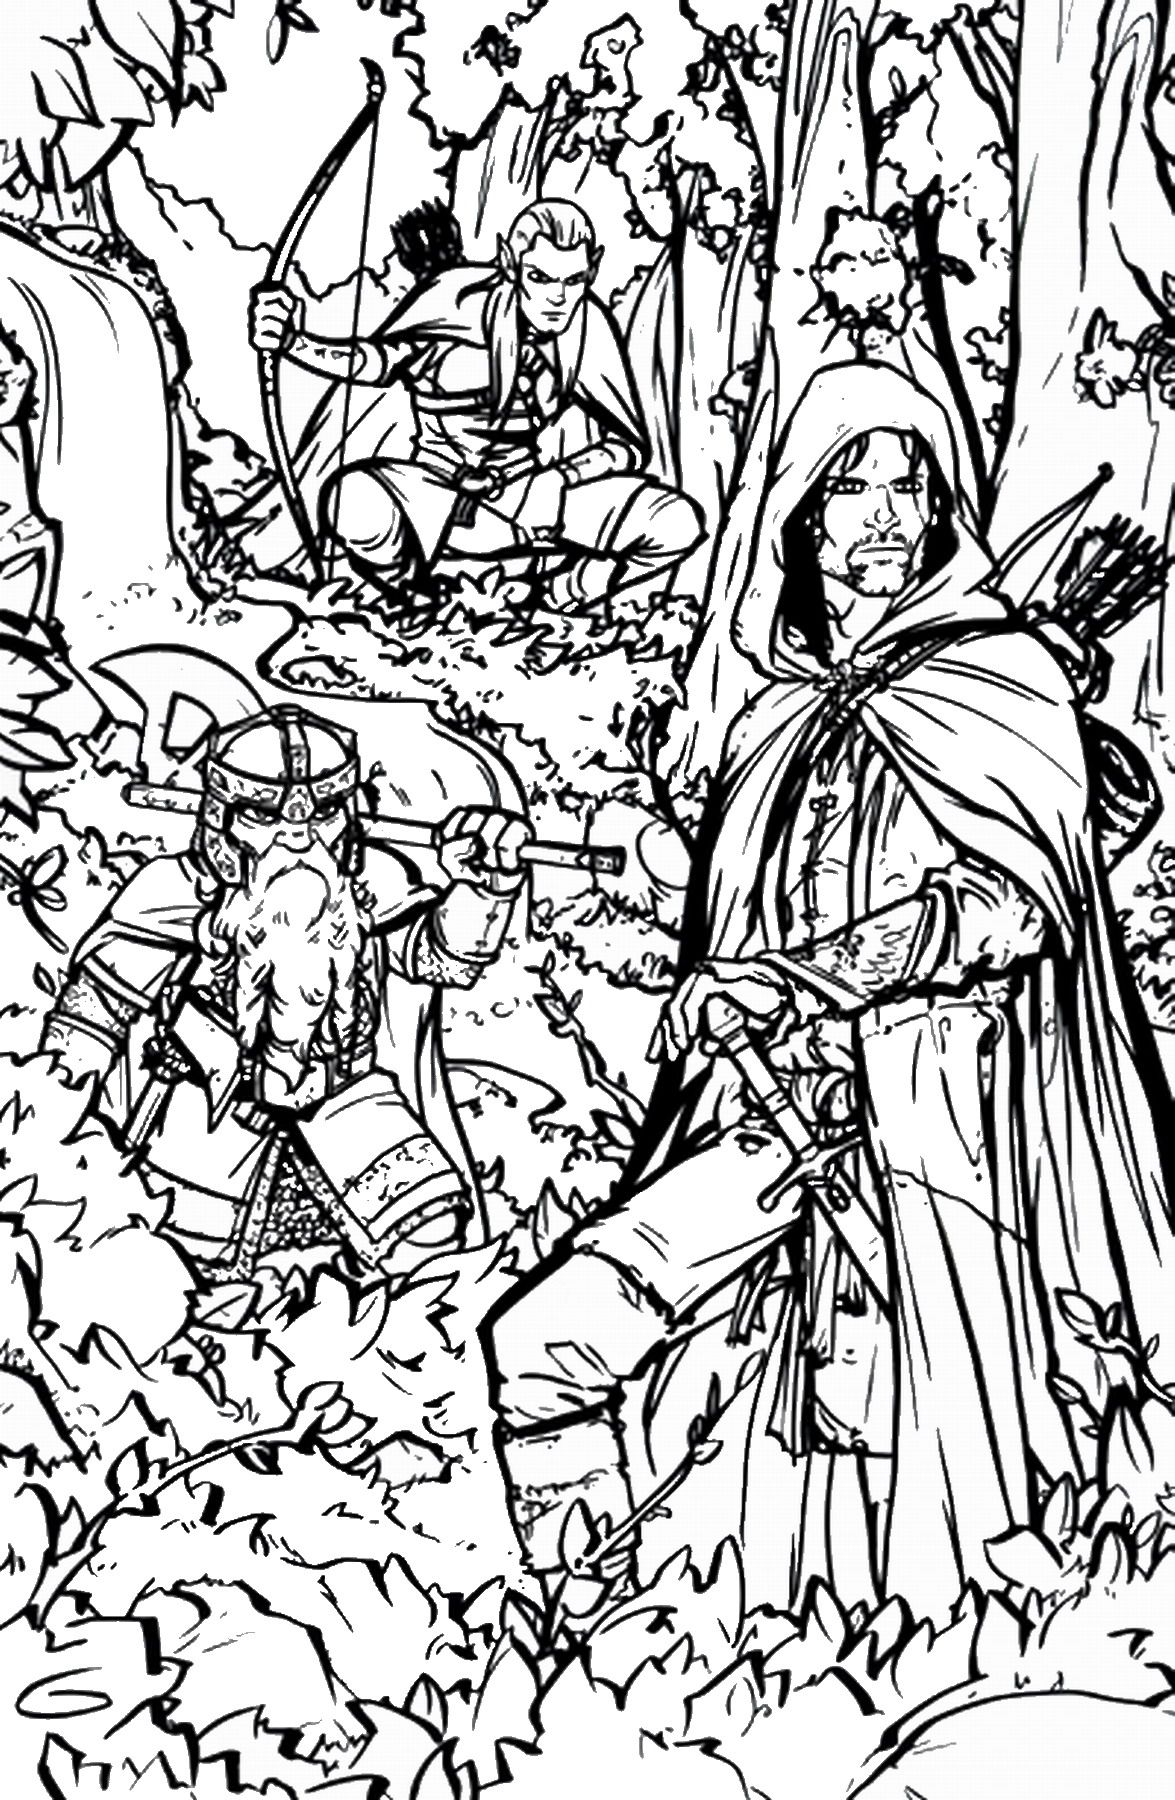 Lord of the rings coloring pages coloring book pages coloring pages coloring books